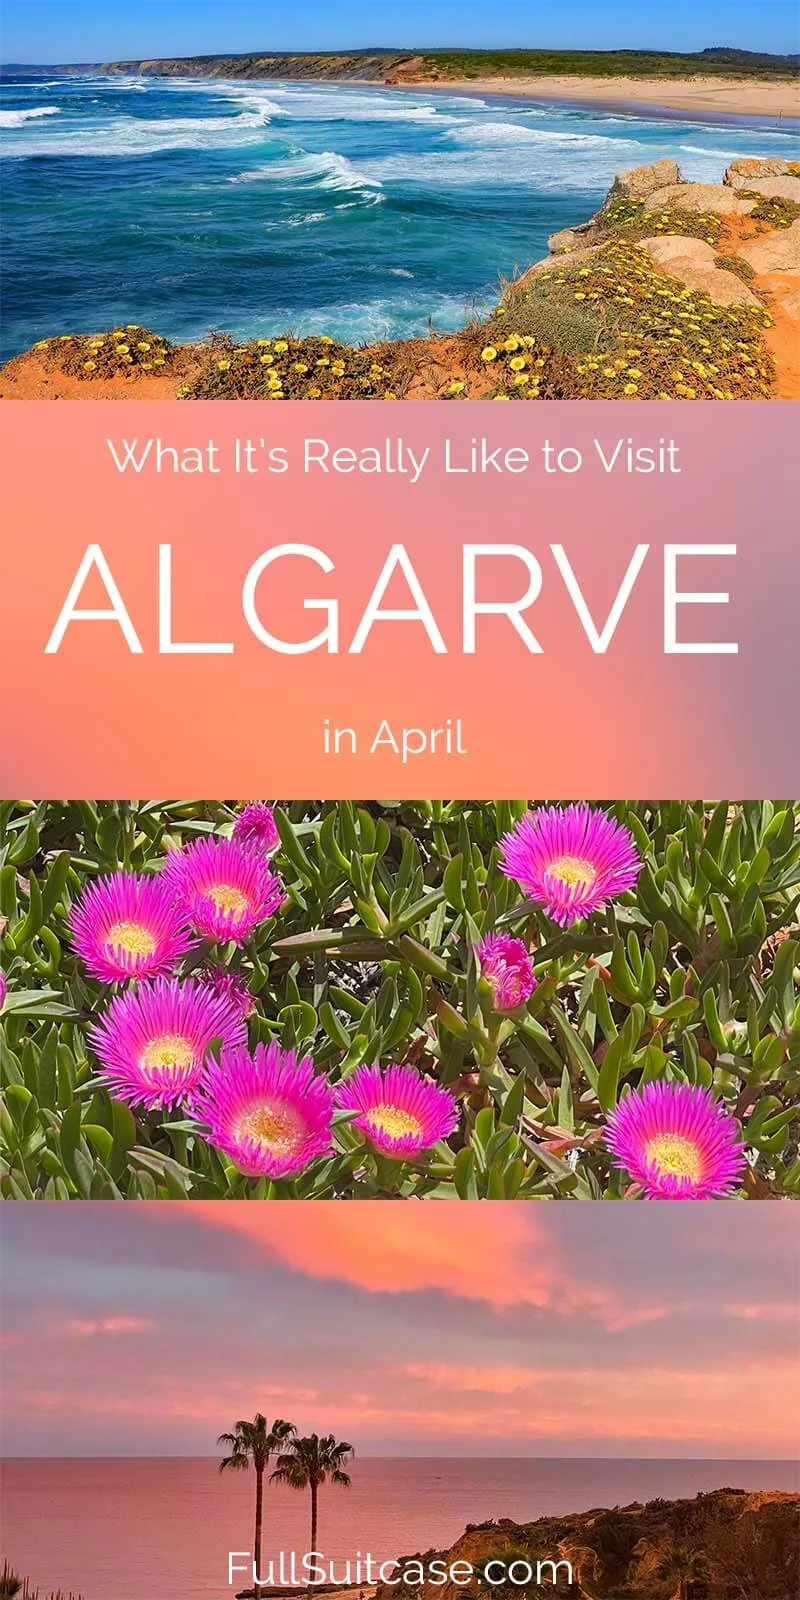 What to expect when visiting Algarve in April (Portugal in the spring)